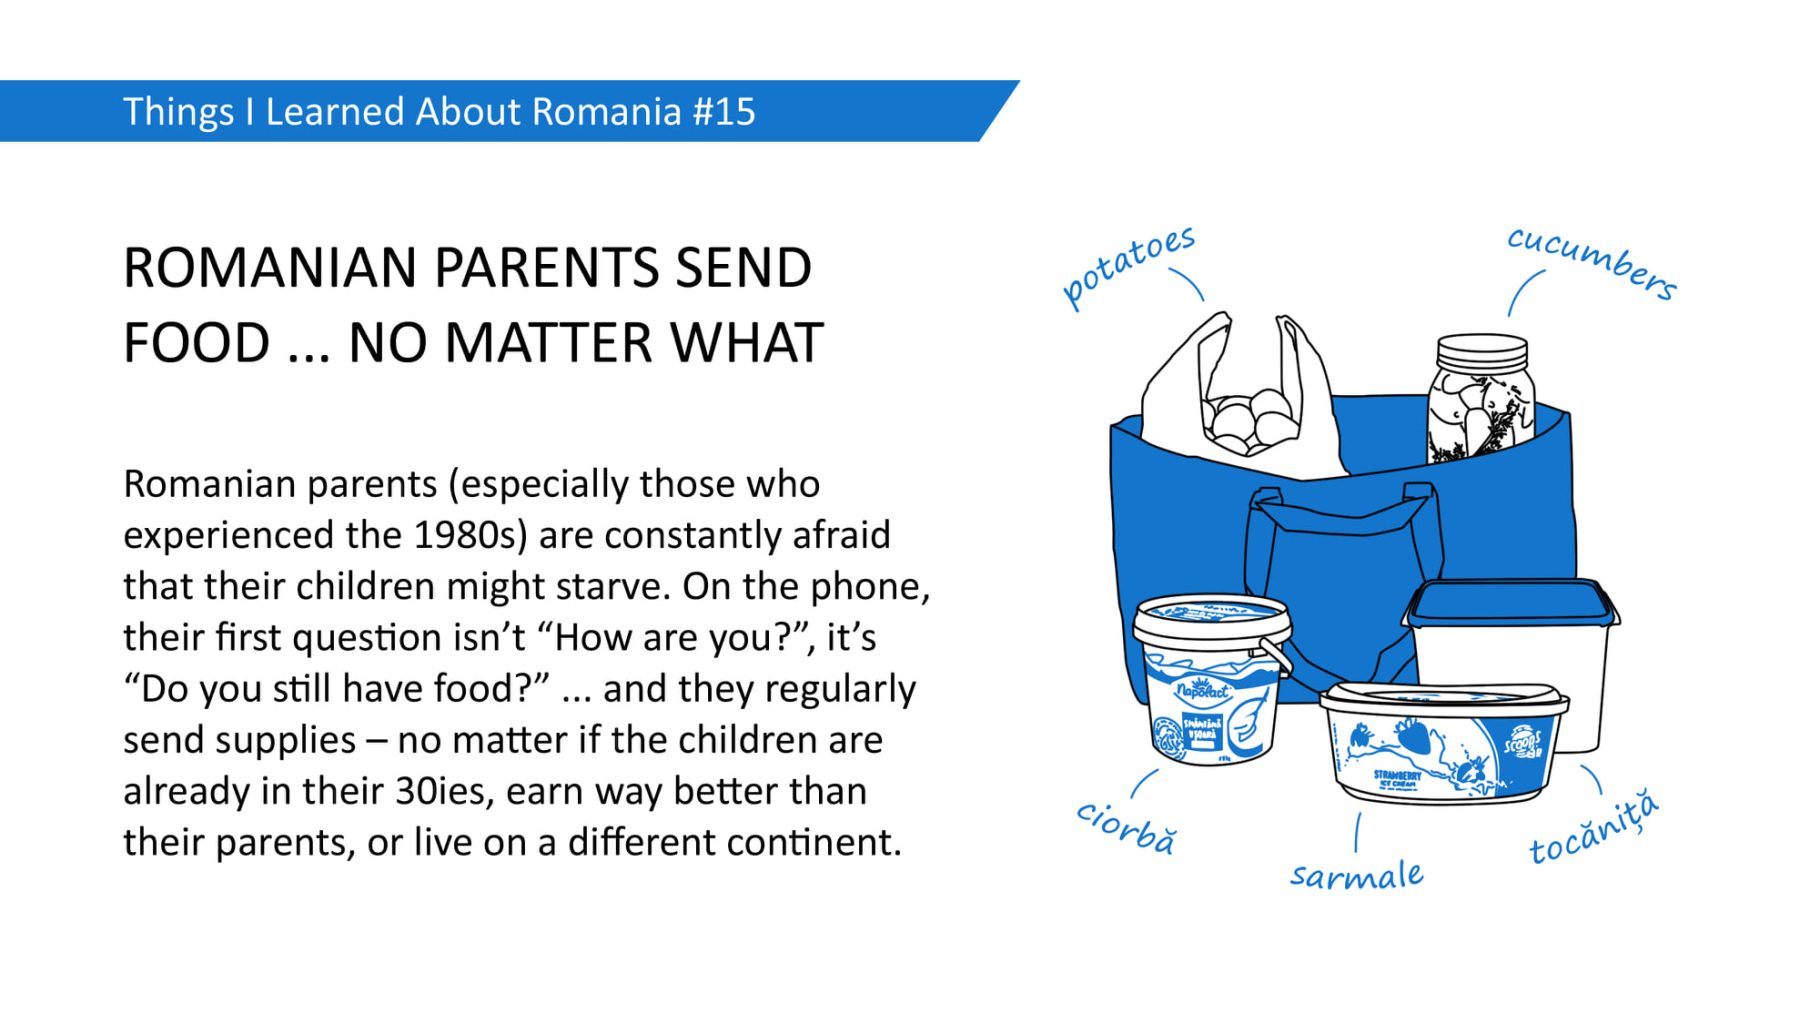 ROMANIAN PARENTS SEND FOOD ... NO MATTER WHAT: Romanian parents (especially those who experienced the 1980s) are constantly afraid that their children might starve. On the phone, their first question isn't "How are you?", it's "Do you still have food?" .. and they regularly send supplies - no matter if the children are already in their 30ies, earn way better than their parents, or live on a different continent.